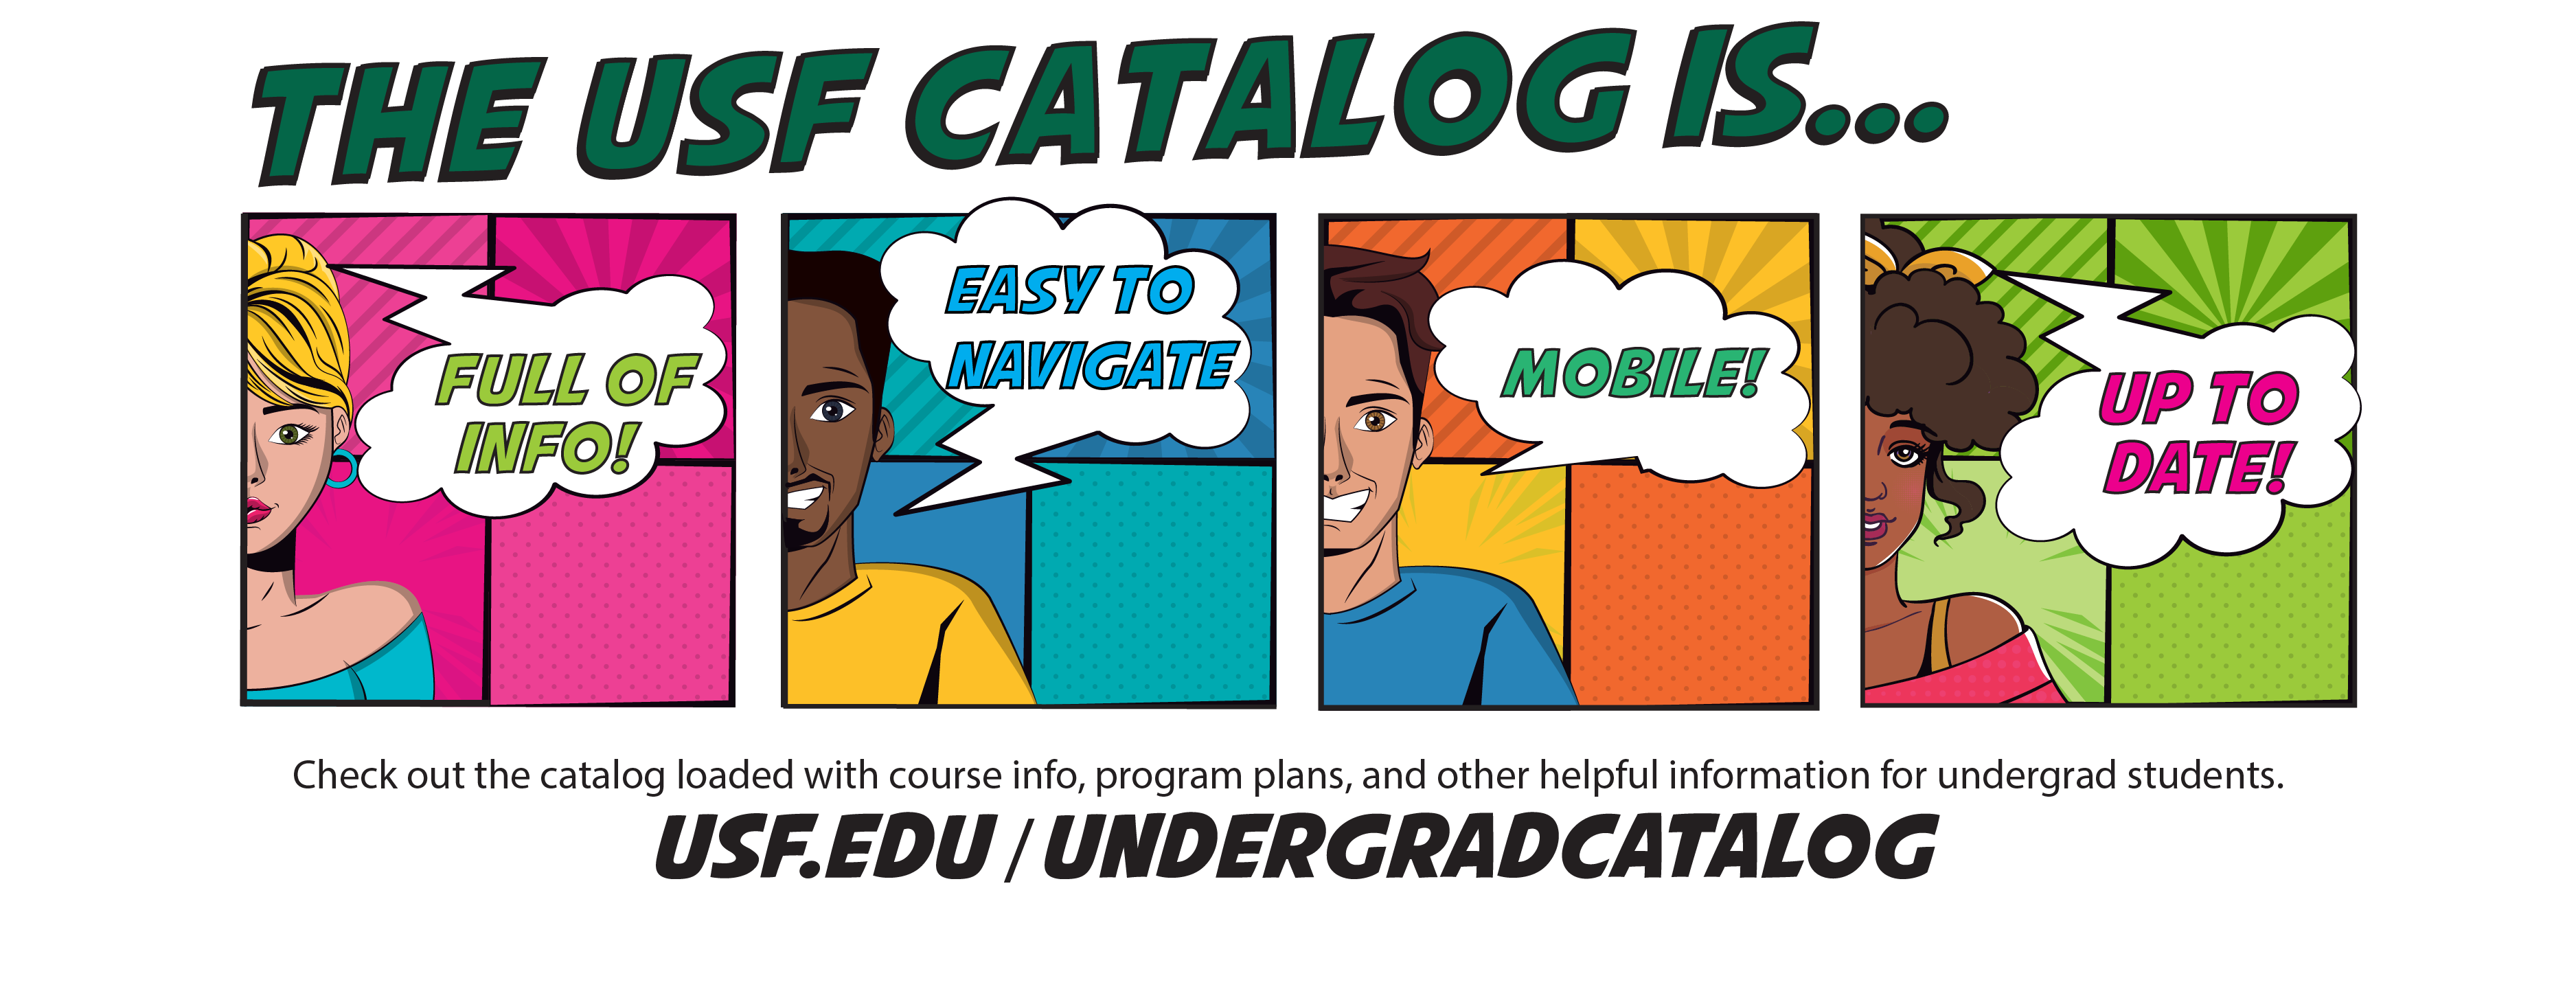 Check out the Undergraduate Catalog!